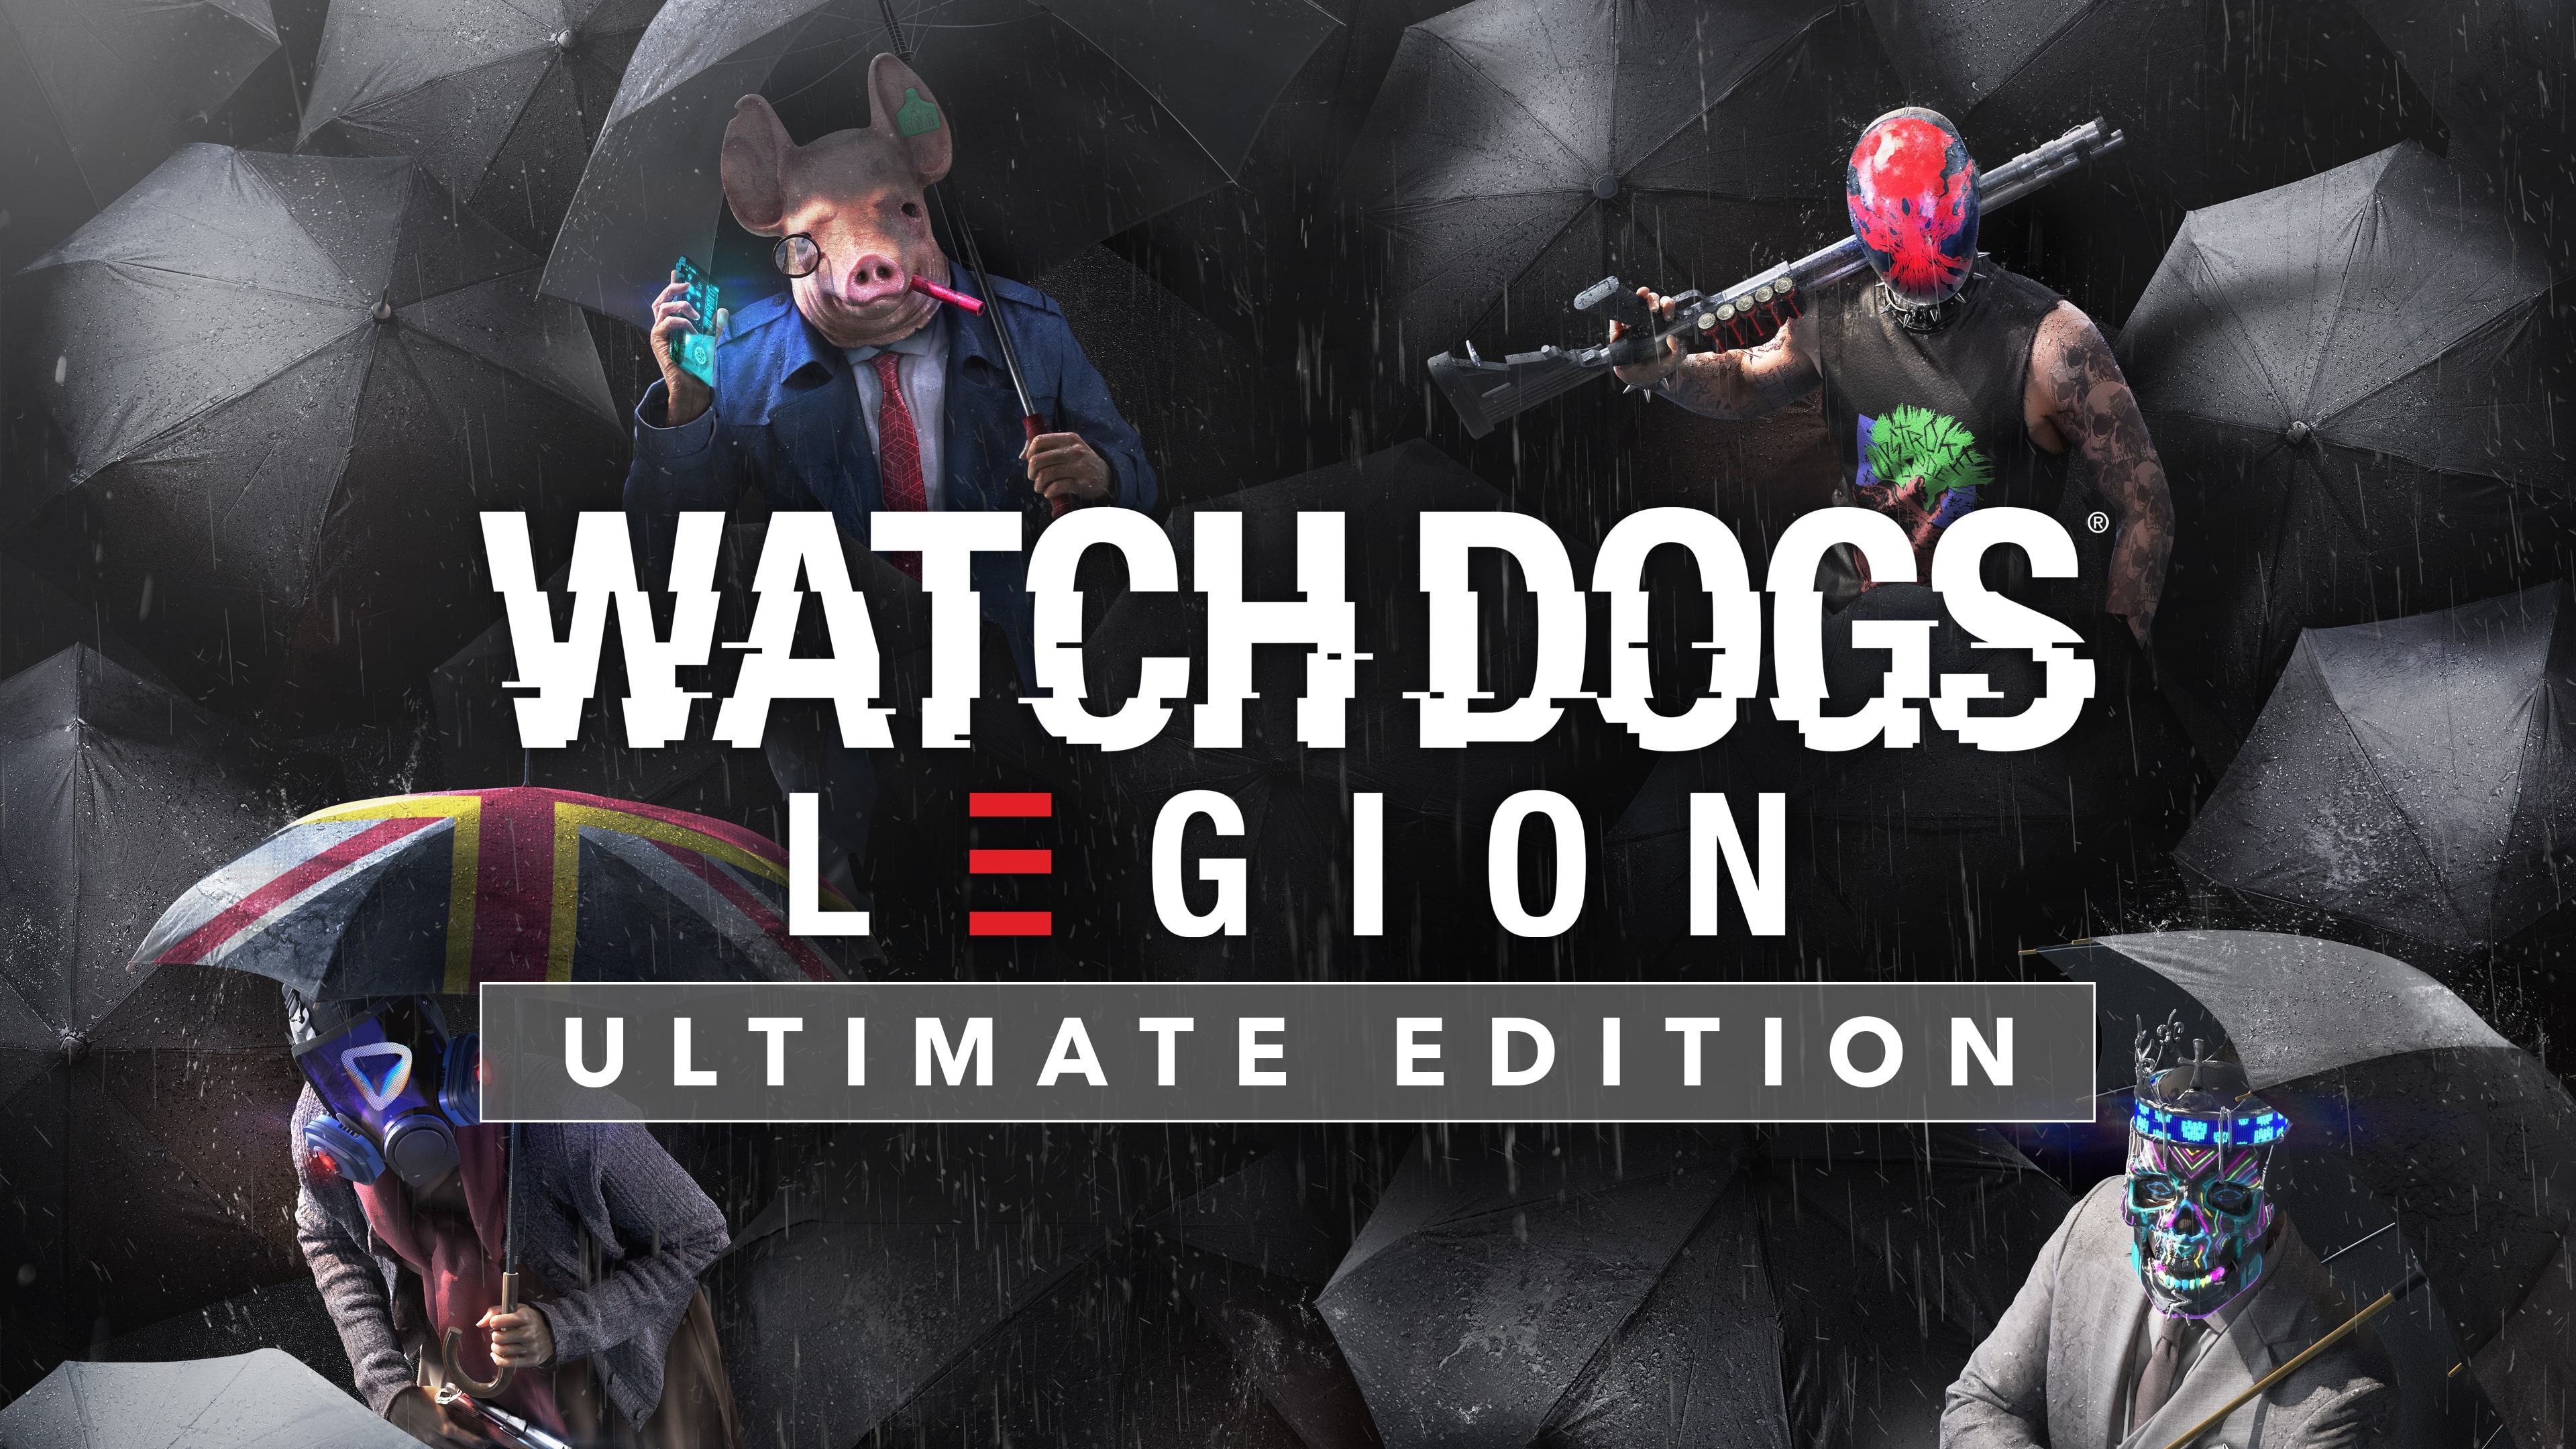 Watch Dogs Legion - PS4 & PS5 Games | PlayStation (US)